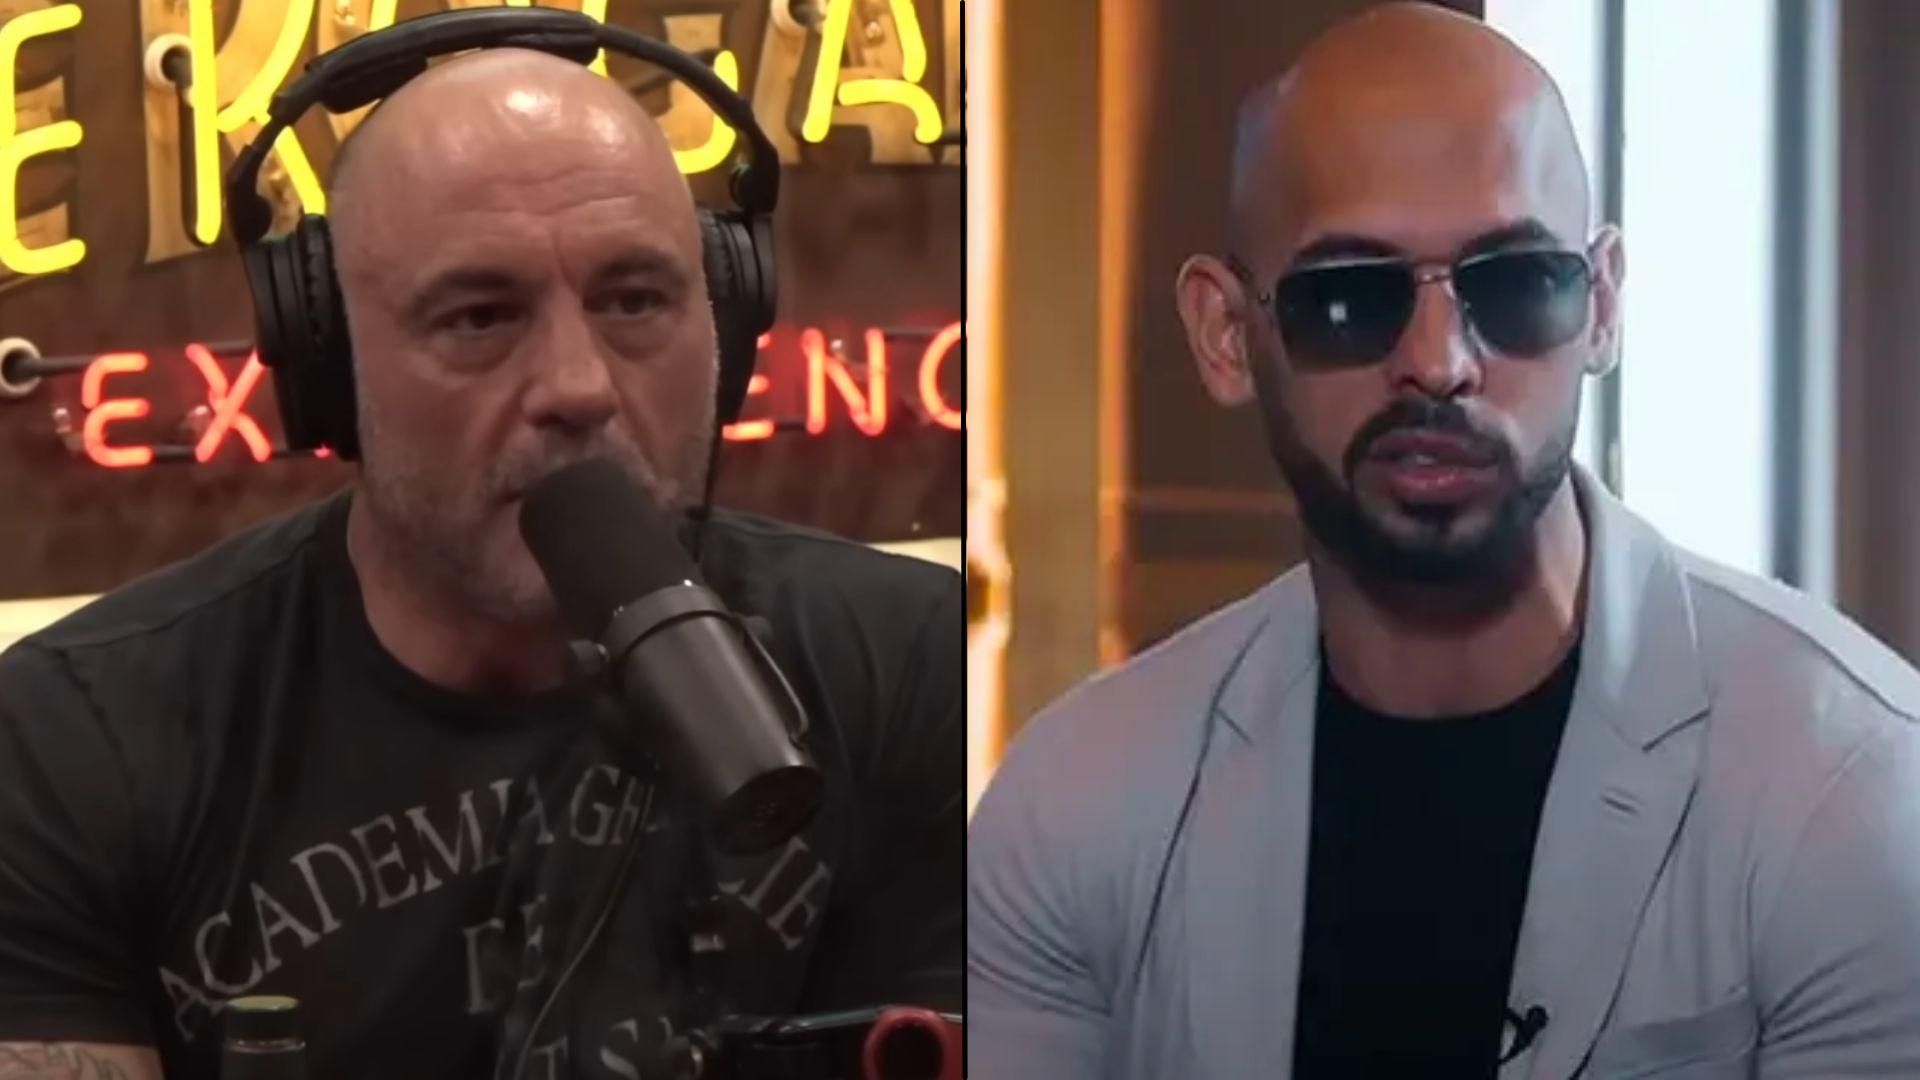 Joe Rogan and Andrew Tate side by side